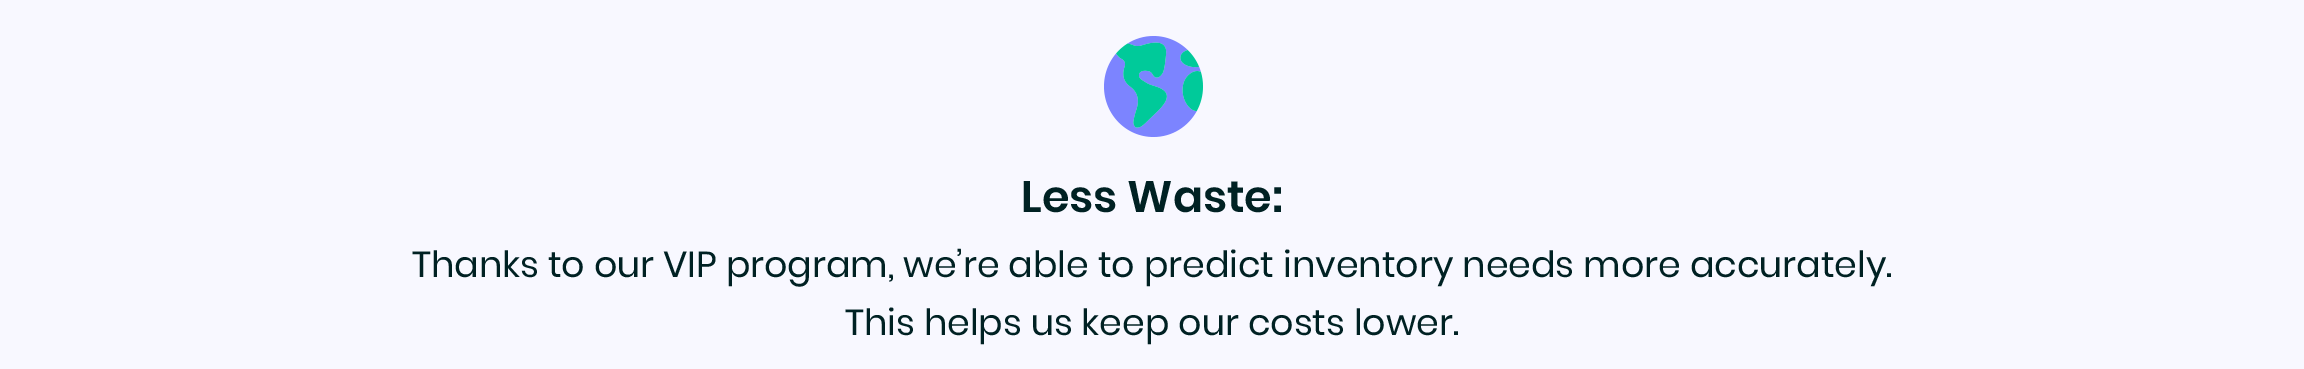 Less Waste: Thanks to our VIP Program, we're able to predict inventory needs more accurately. This helps us keep our costs lower.